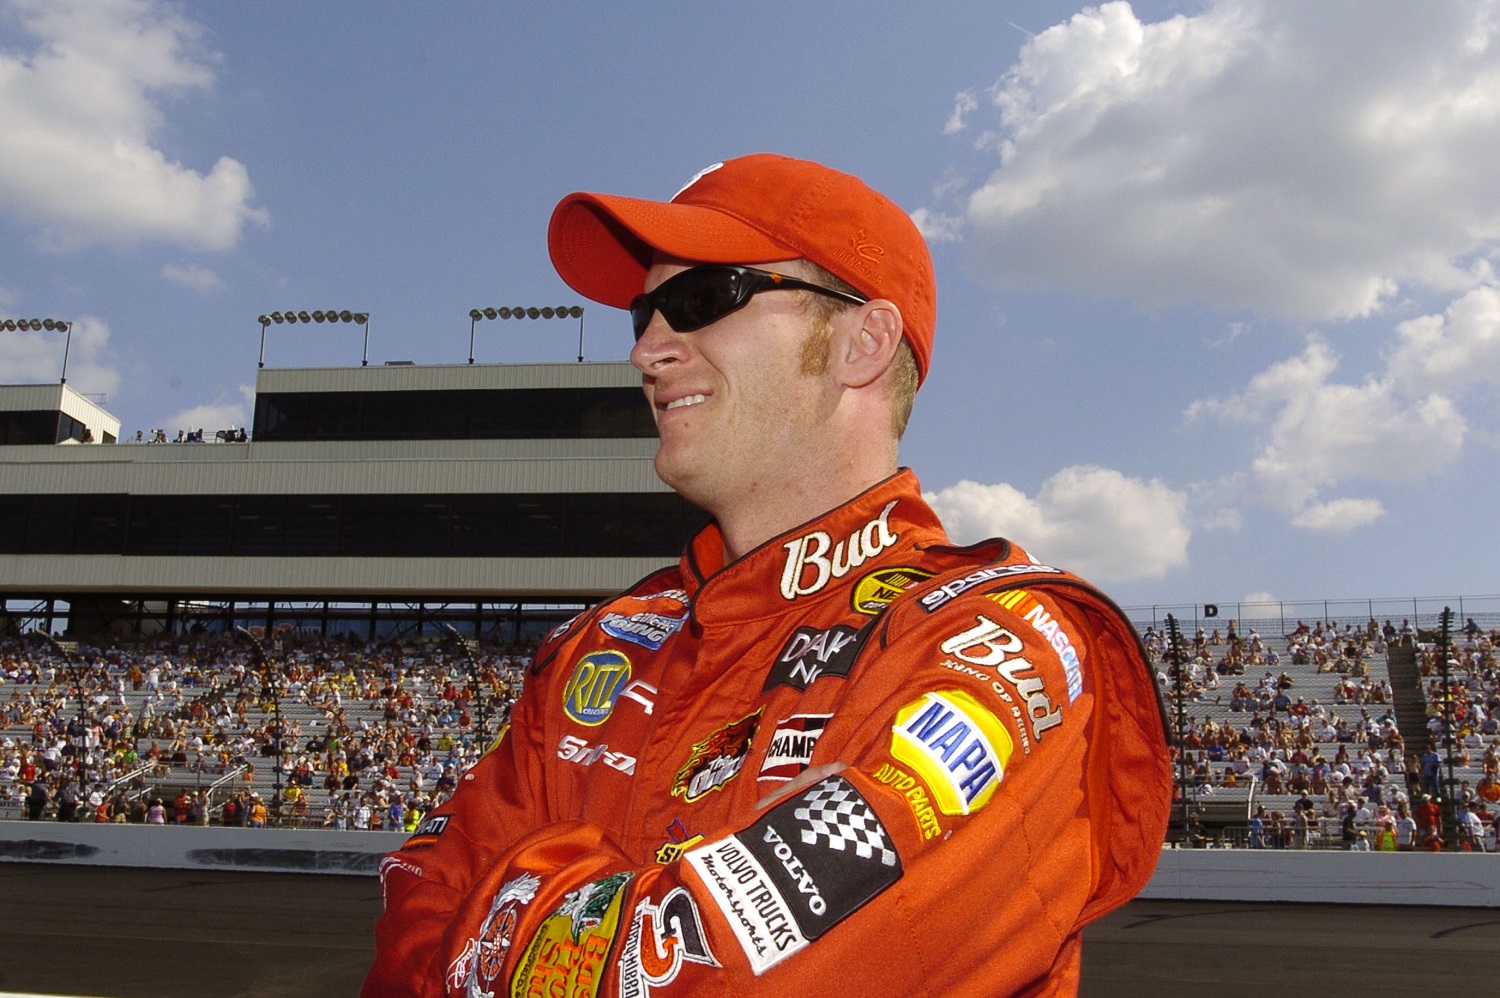 Dale Earnhardt Jr.  competes in  the NASCAR Nextel Cup Series Chevy American Revolution 400 at Richmond International Raceway on May 14, 2004. | A. Messerschmidt/Getty Images